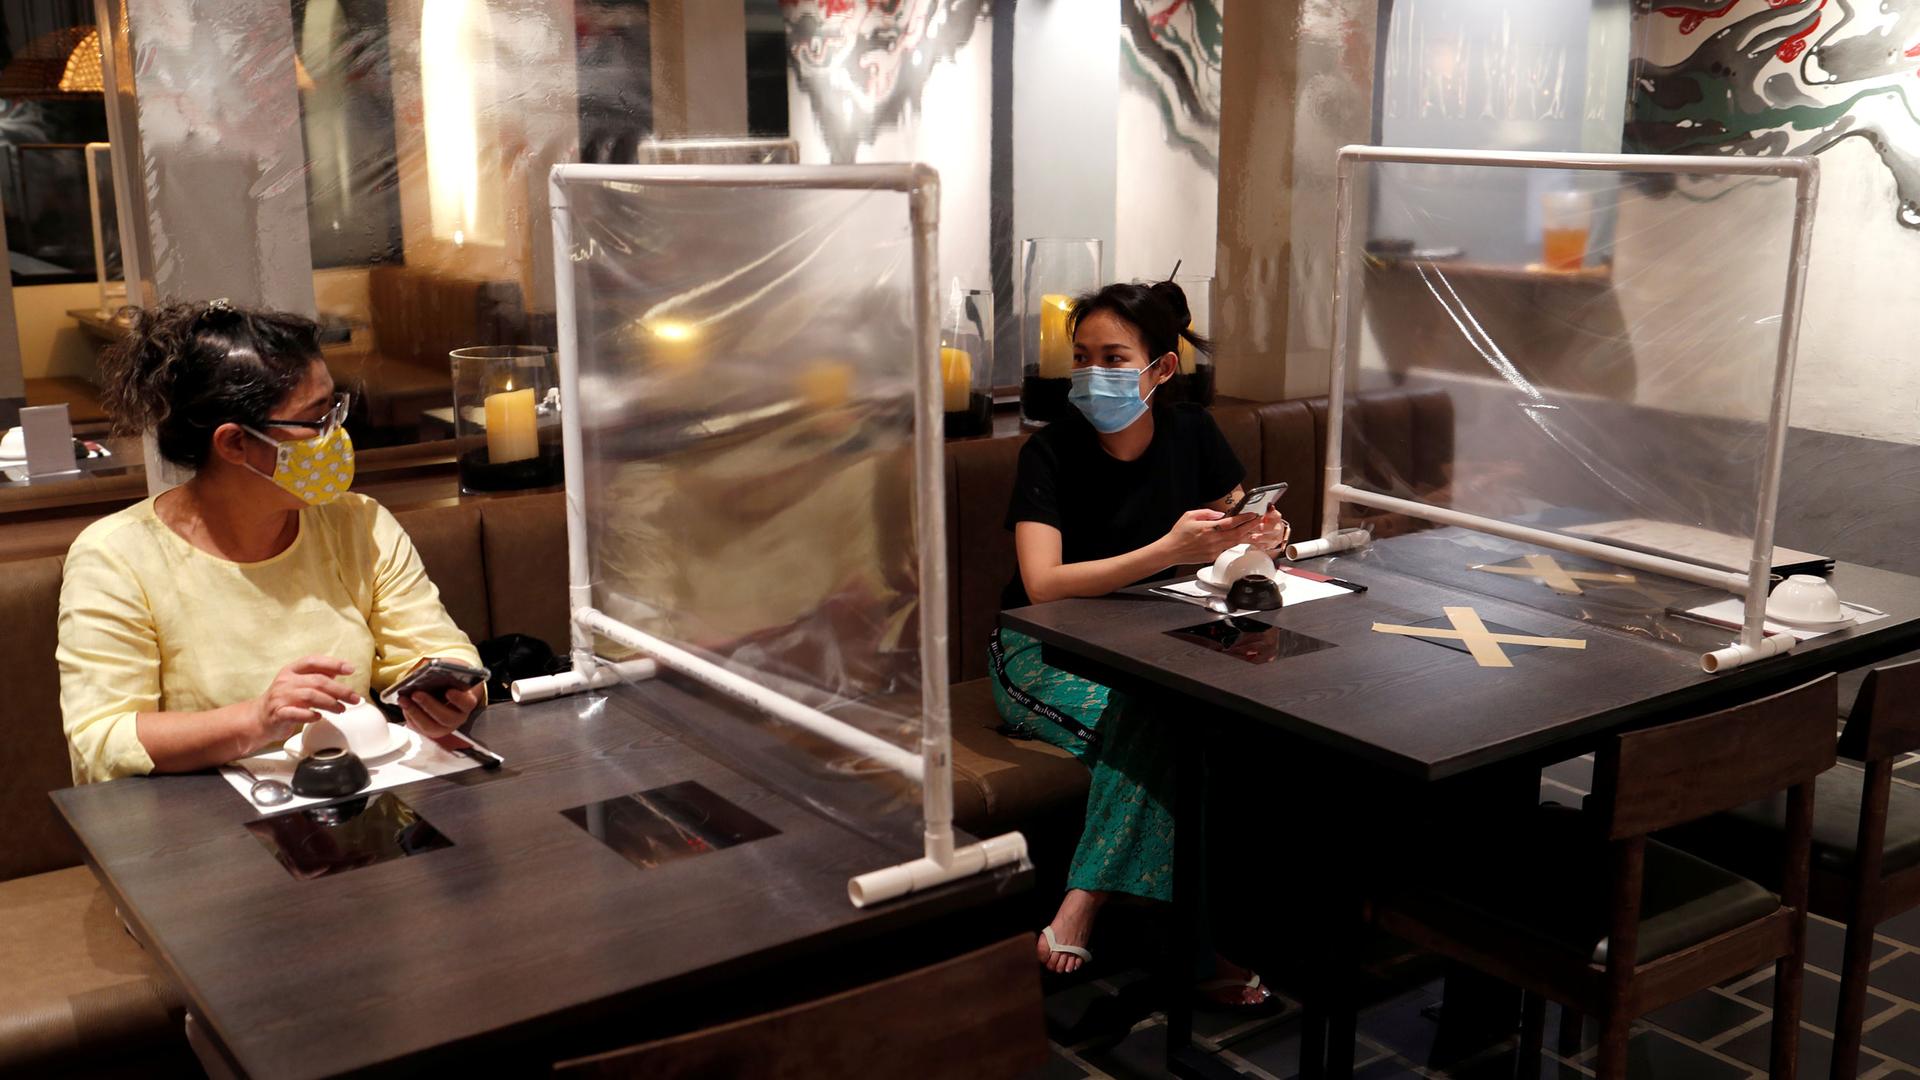 Two women are shown sitting at separate tables, wearing protective face masks with a plastic screen in-between them.